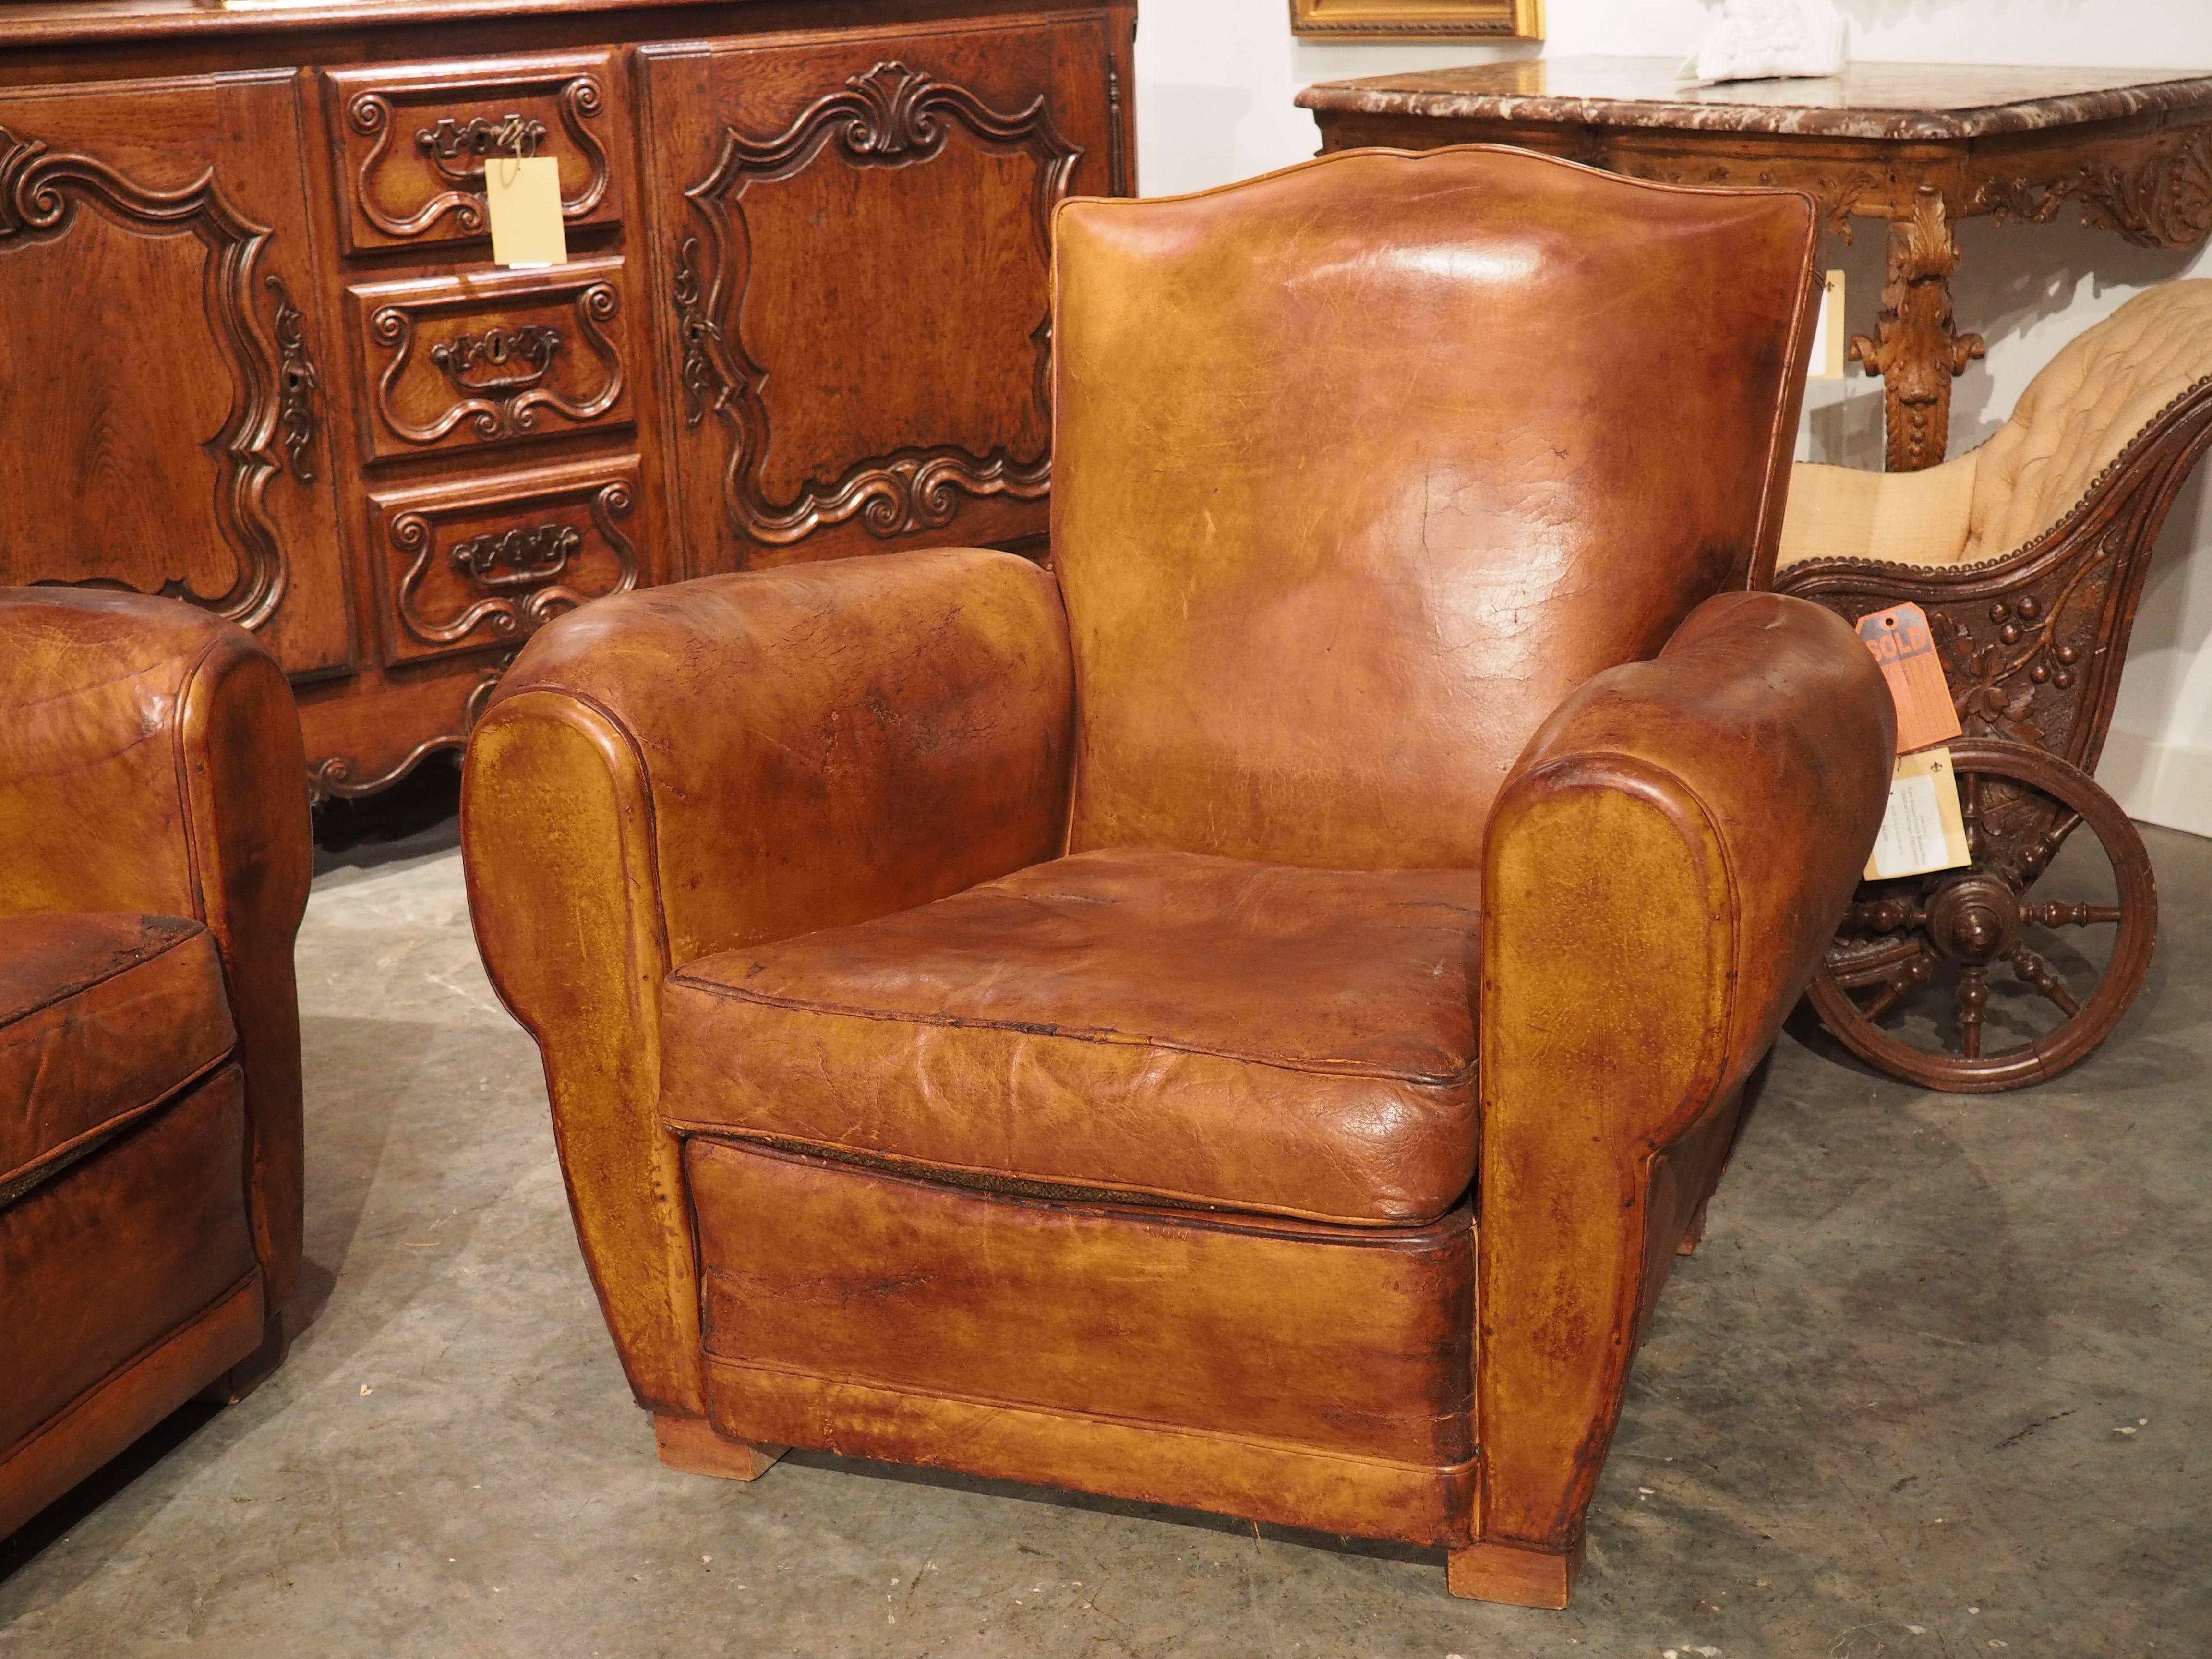 Club chairs, which are armchairs completely covered in leather, first appeared in France at the beginning of the 20th century. Originally called fauteuil comfortable (“comfortable armchairs”), authentic club chairs are covered in sheepskin leather.